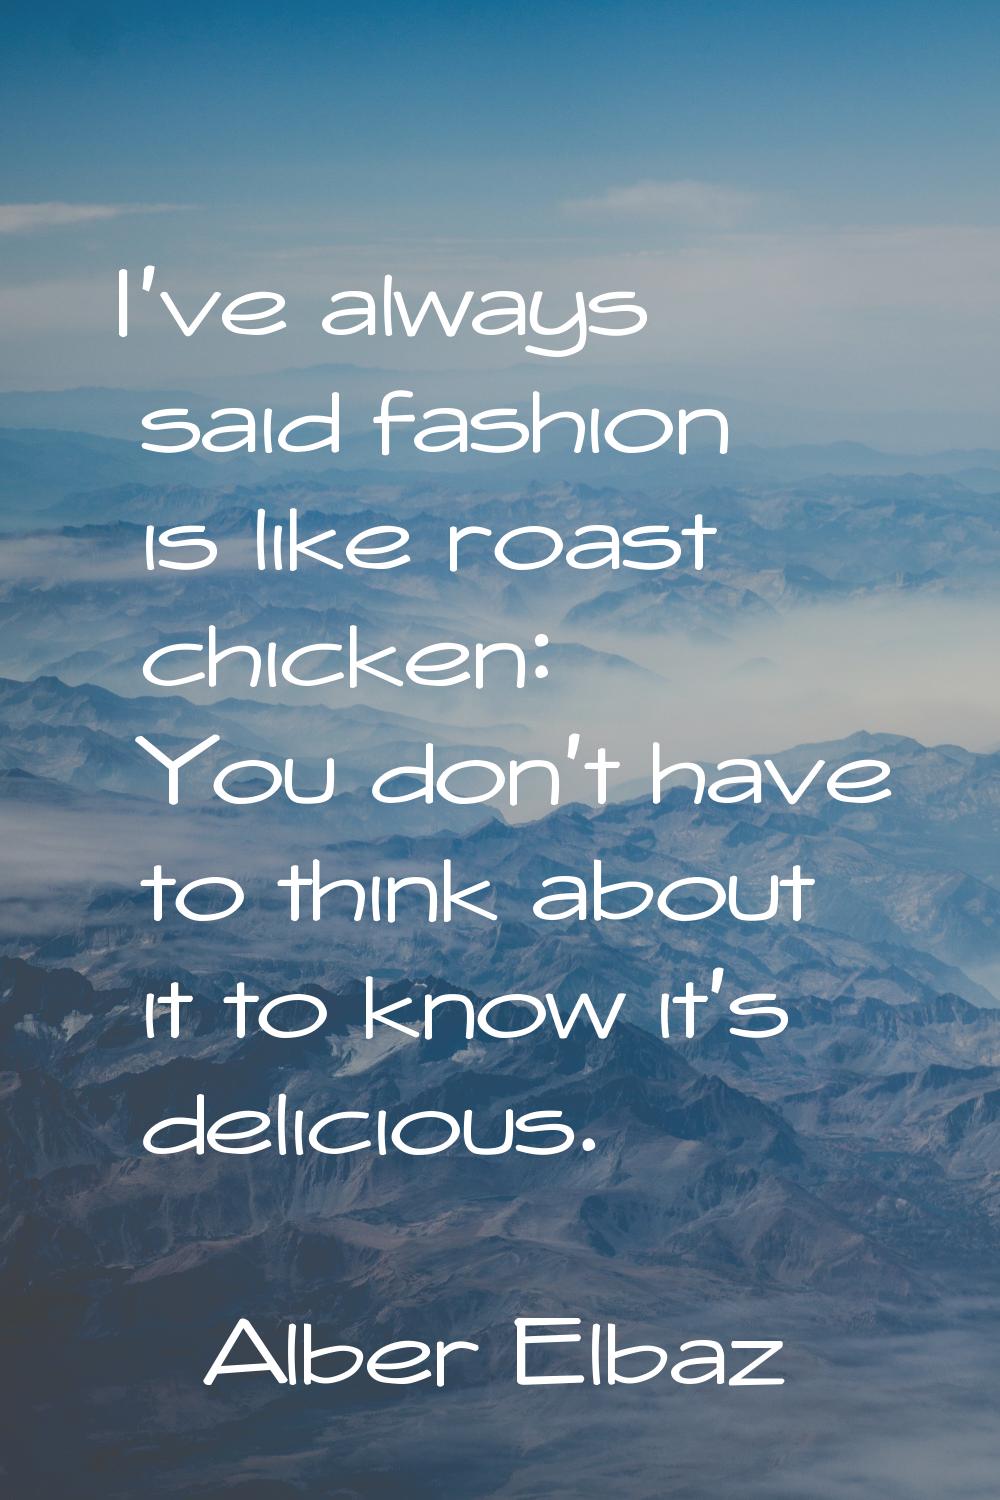 I've always said fashion is like roast chicken: You don't have to think about it to know it's delic